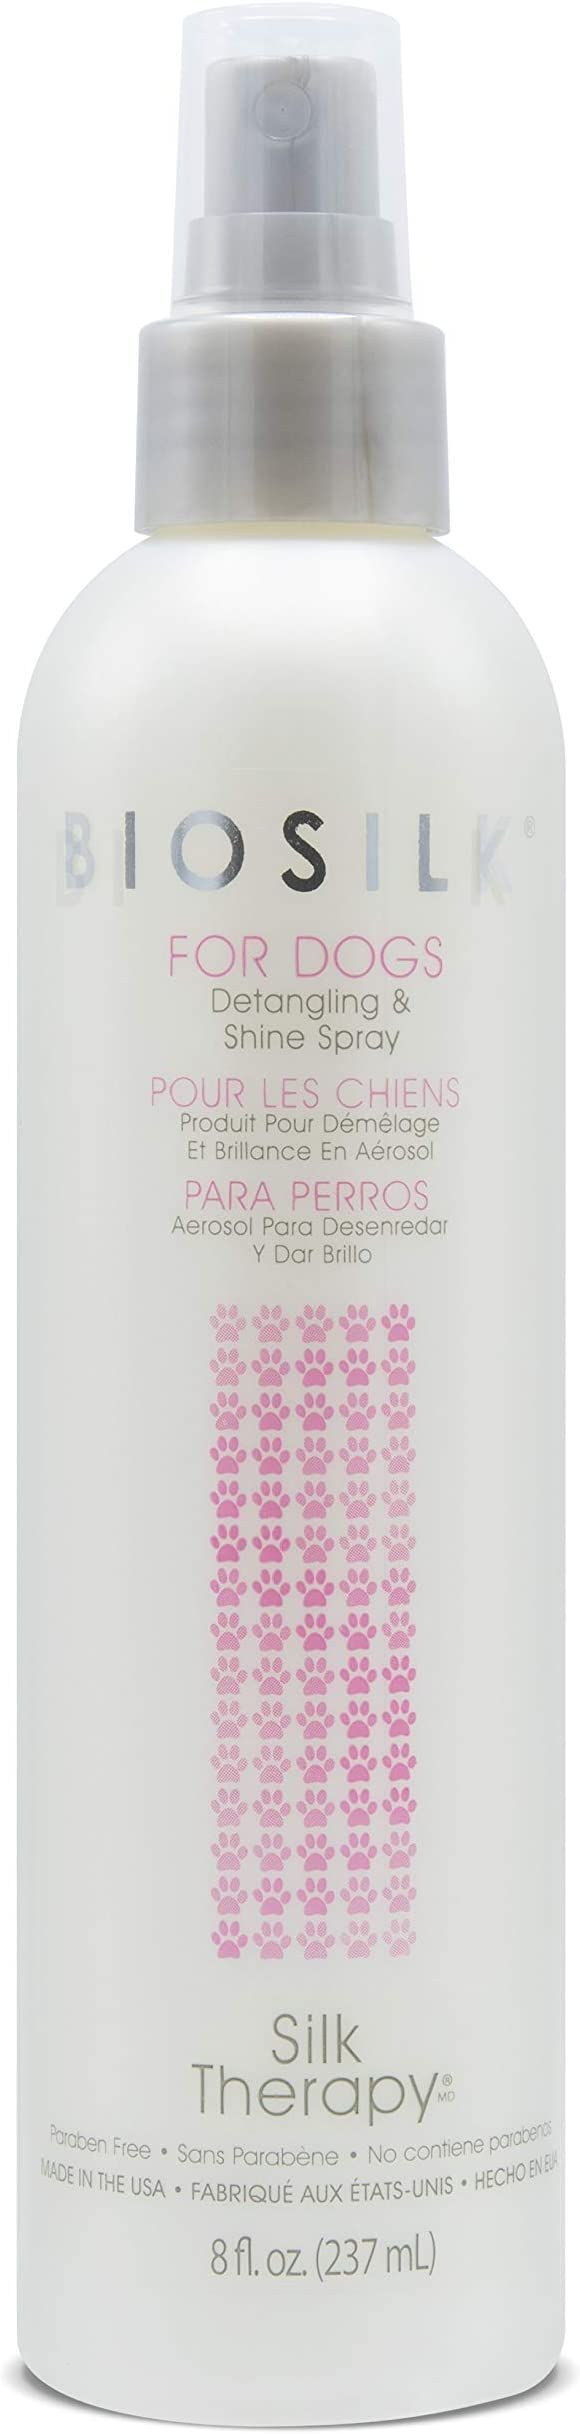 BioSilk for Dogs Silk Therapy Detangling Plus Shine Mist for Dogs | Best Detangling Spray for All... | Amazon (US)